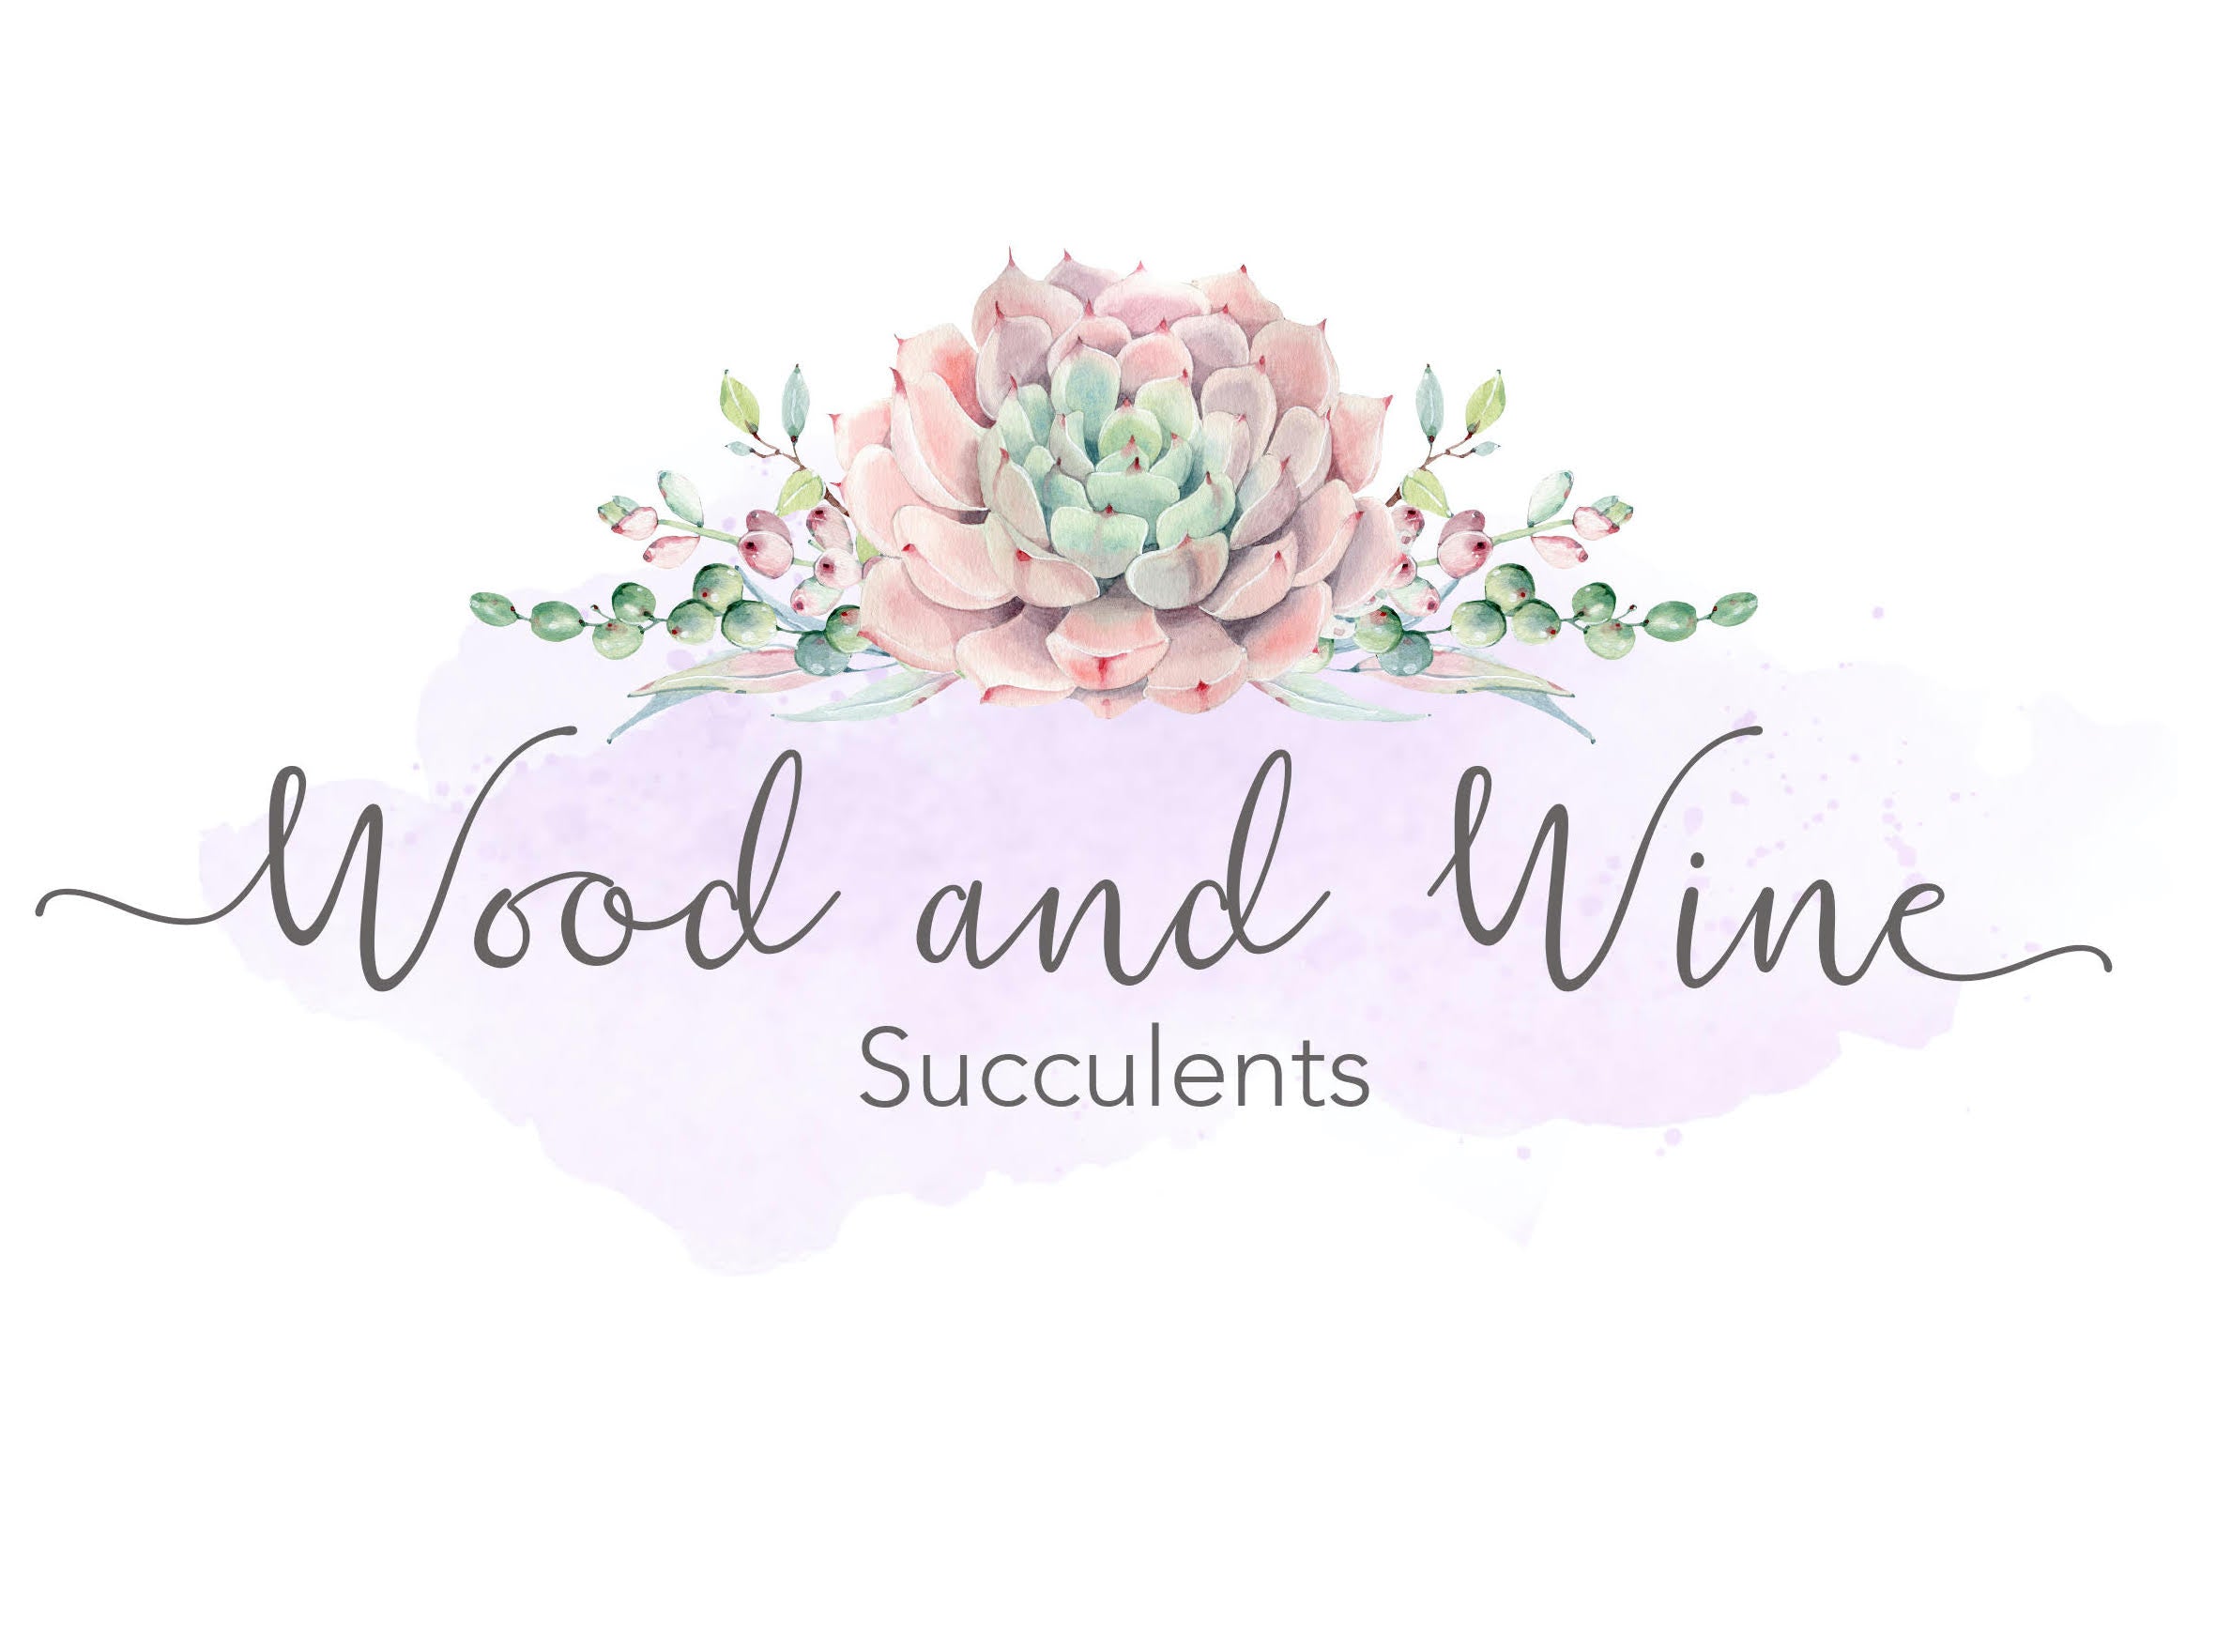 Wood and Wine Succulents